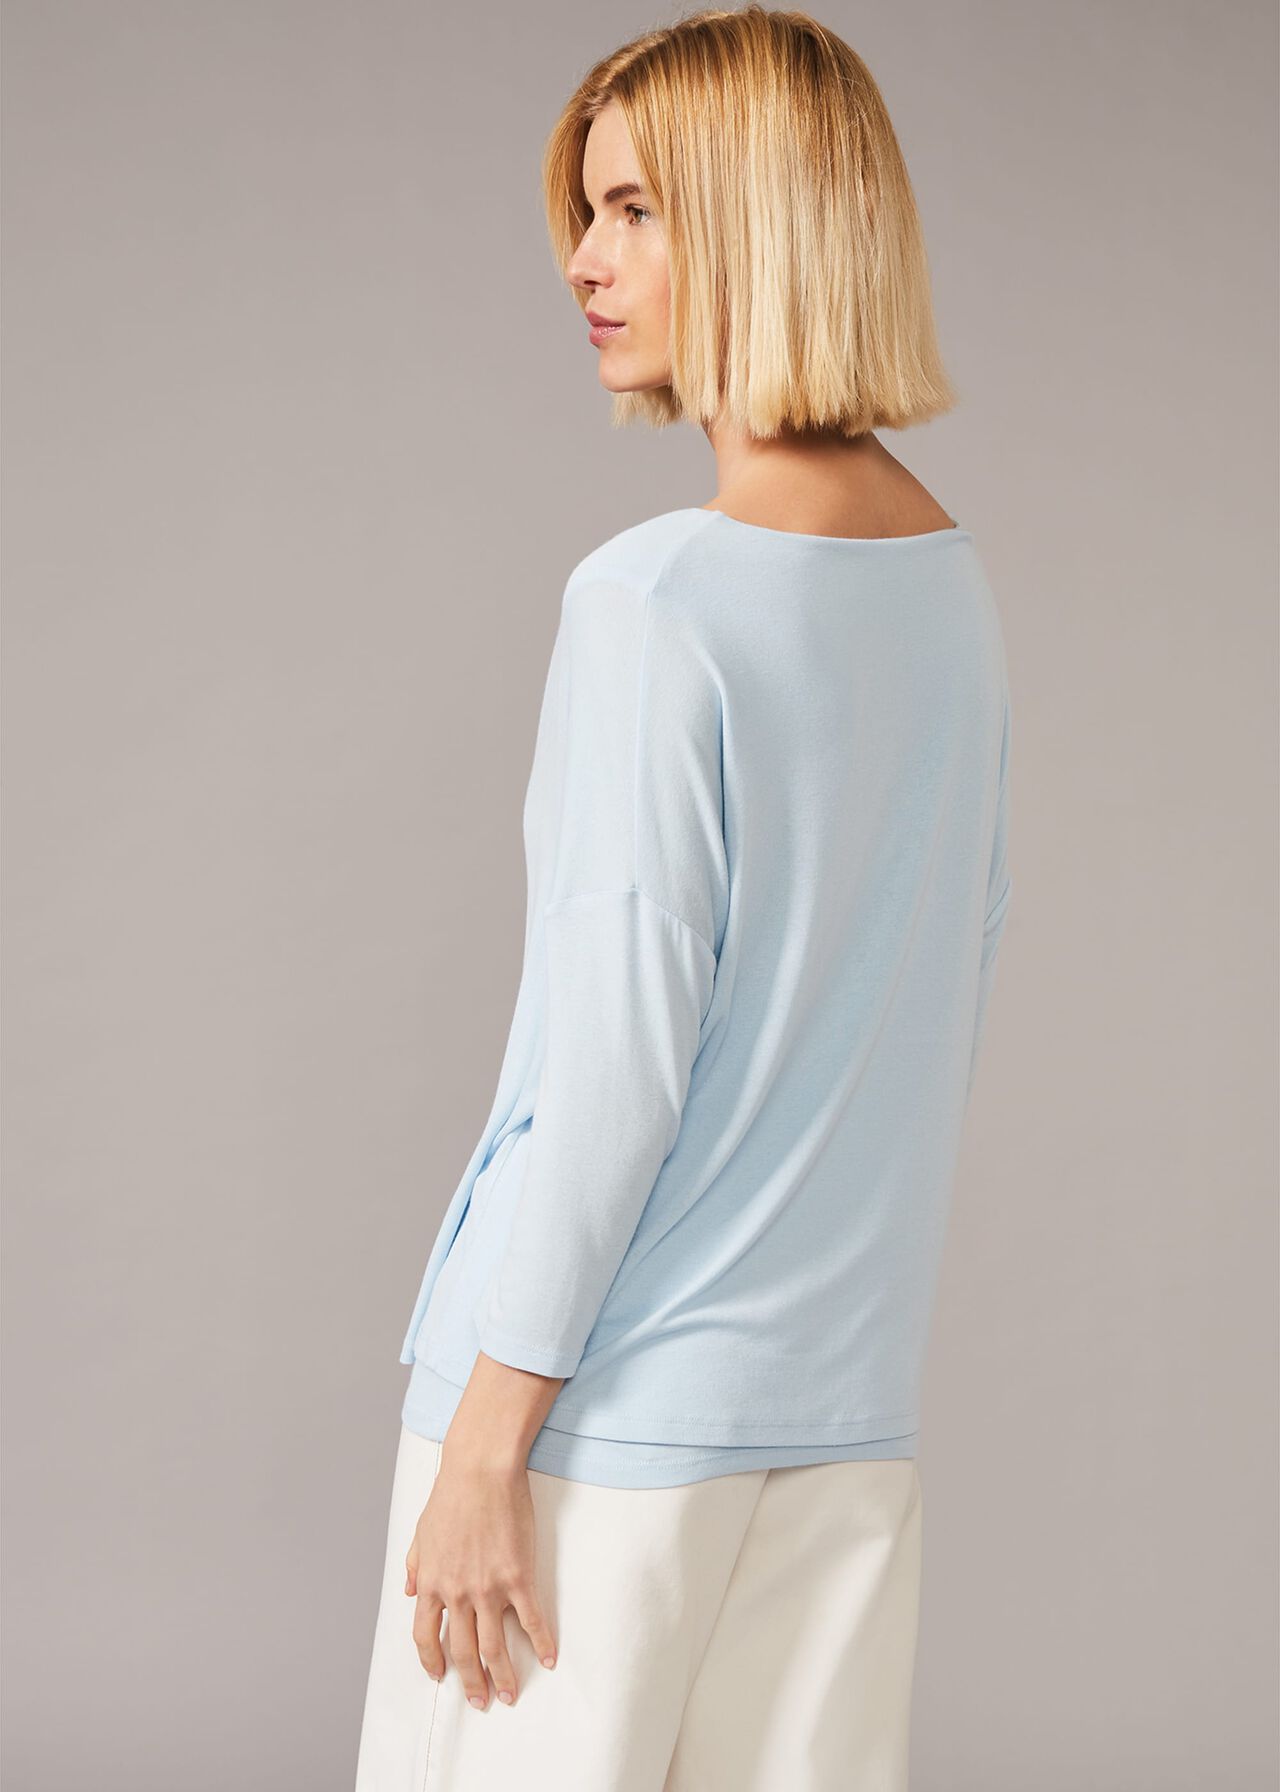 Caggie Cowl Neck Double Layer Top